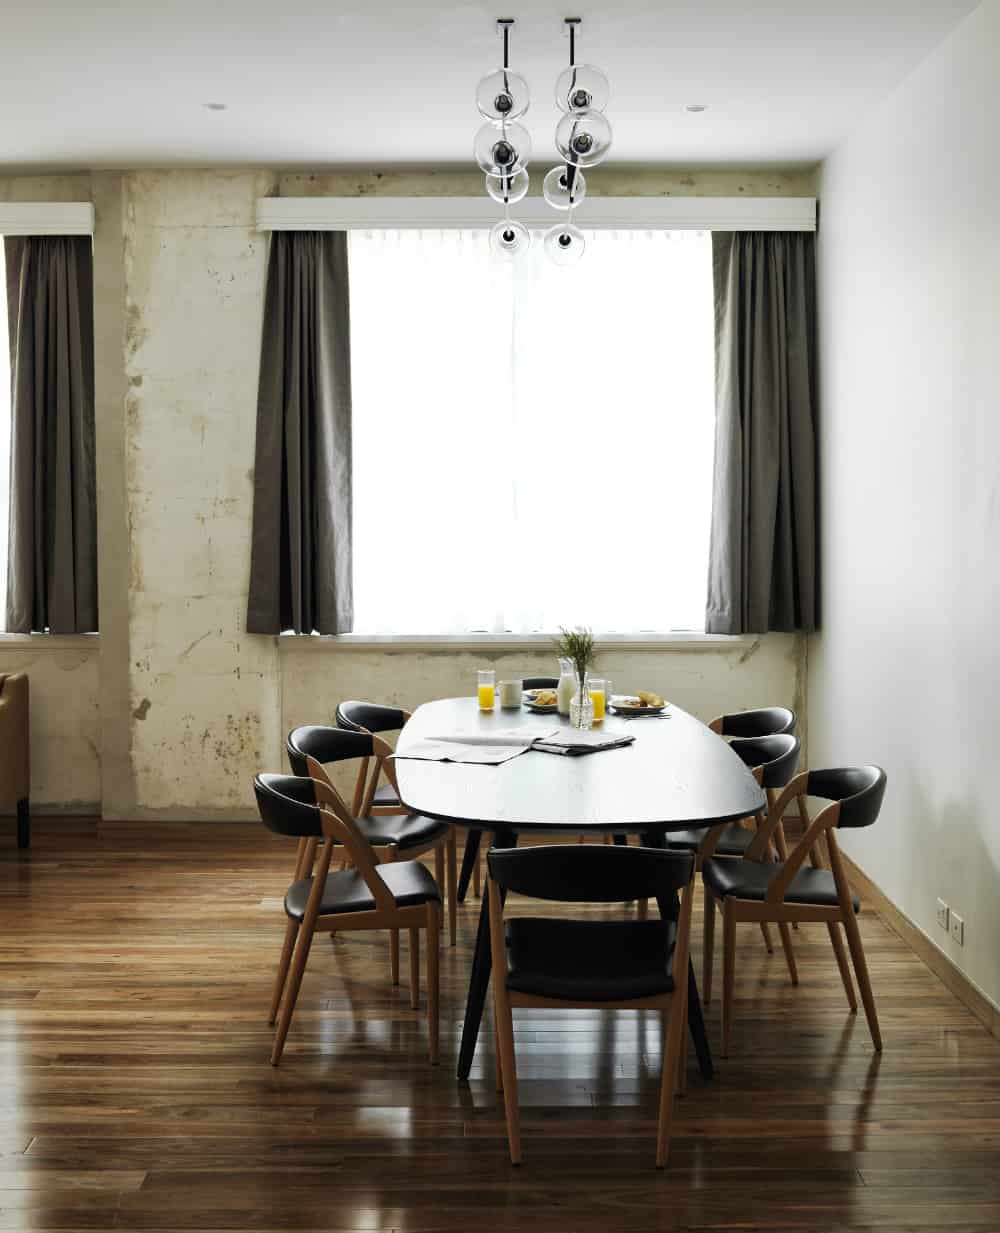 A dining area in a room with distressed walls